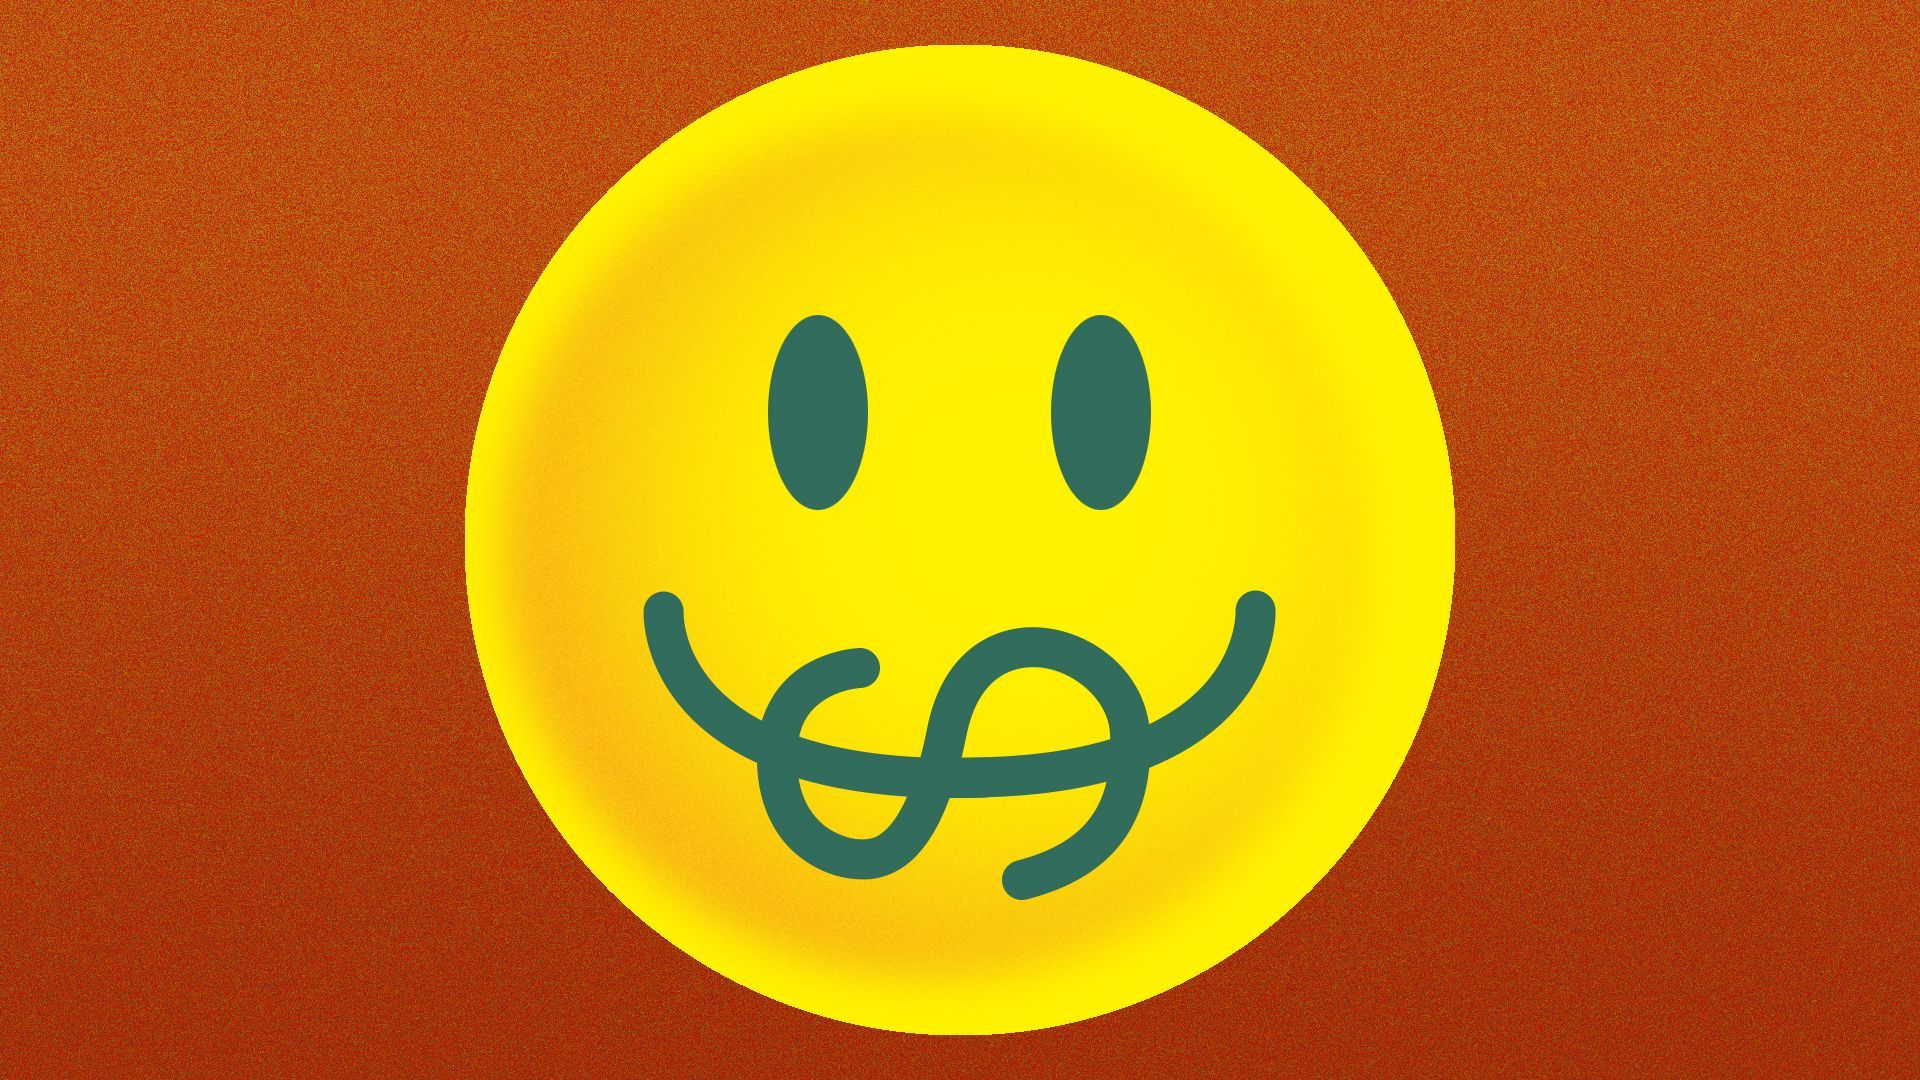 Illustration of a yellow smiley face's mouth made from a dollar sign